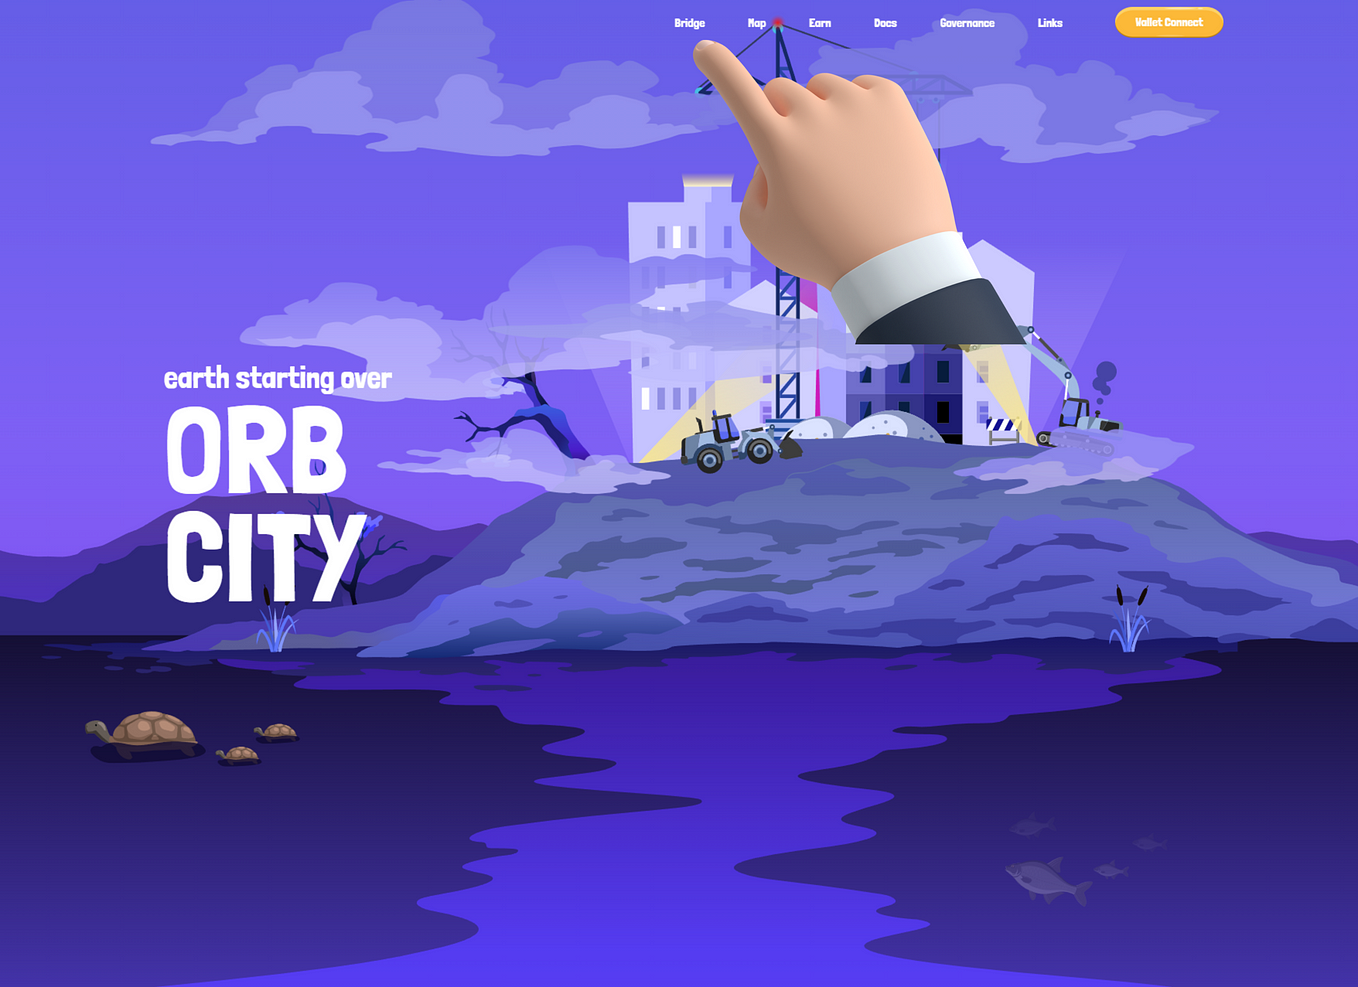 Orbcity Game Guide to Play and Earn ORB Crypto Tokens